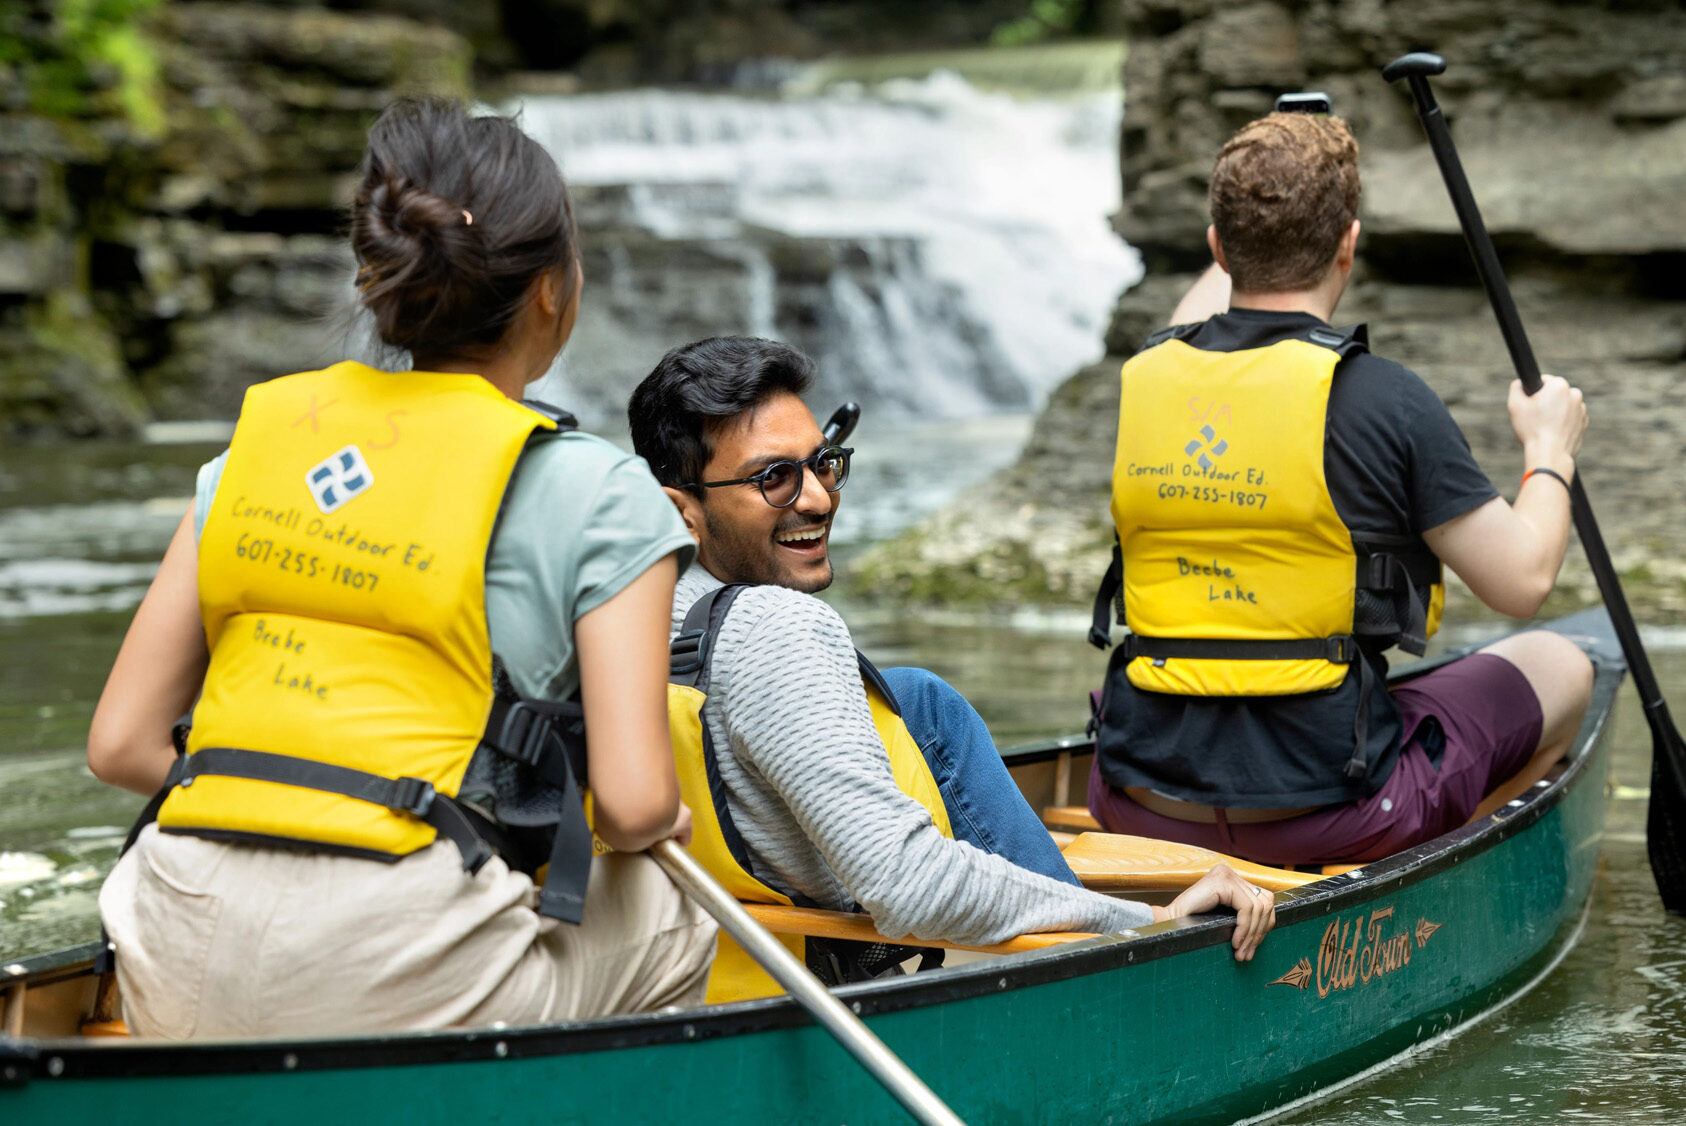 A trio in a canoe in the waters of Upstate New York